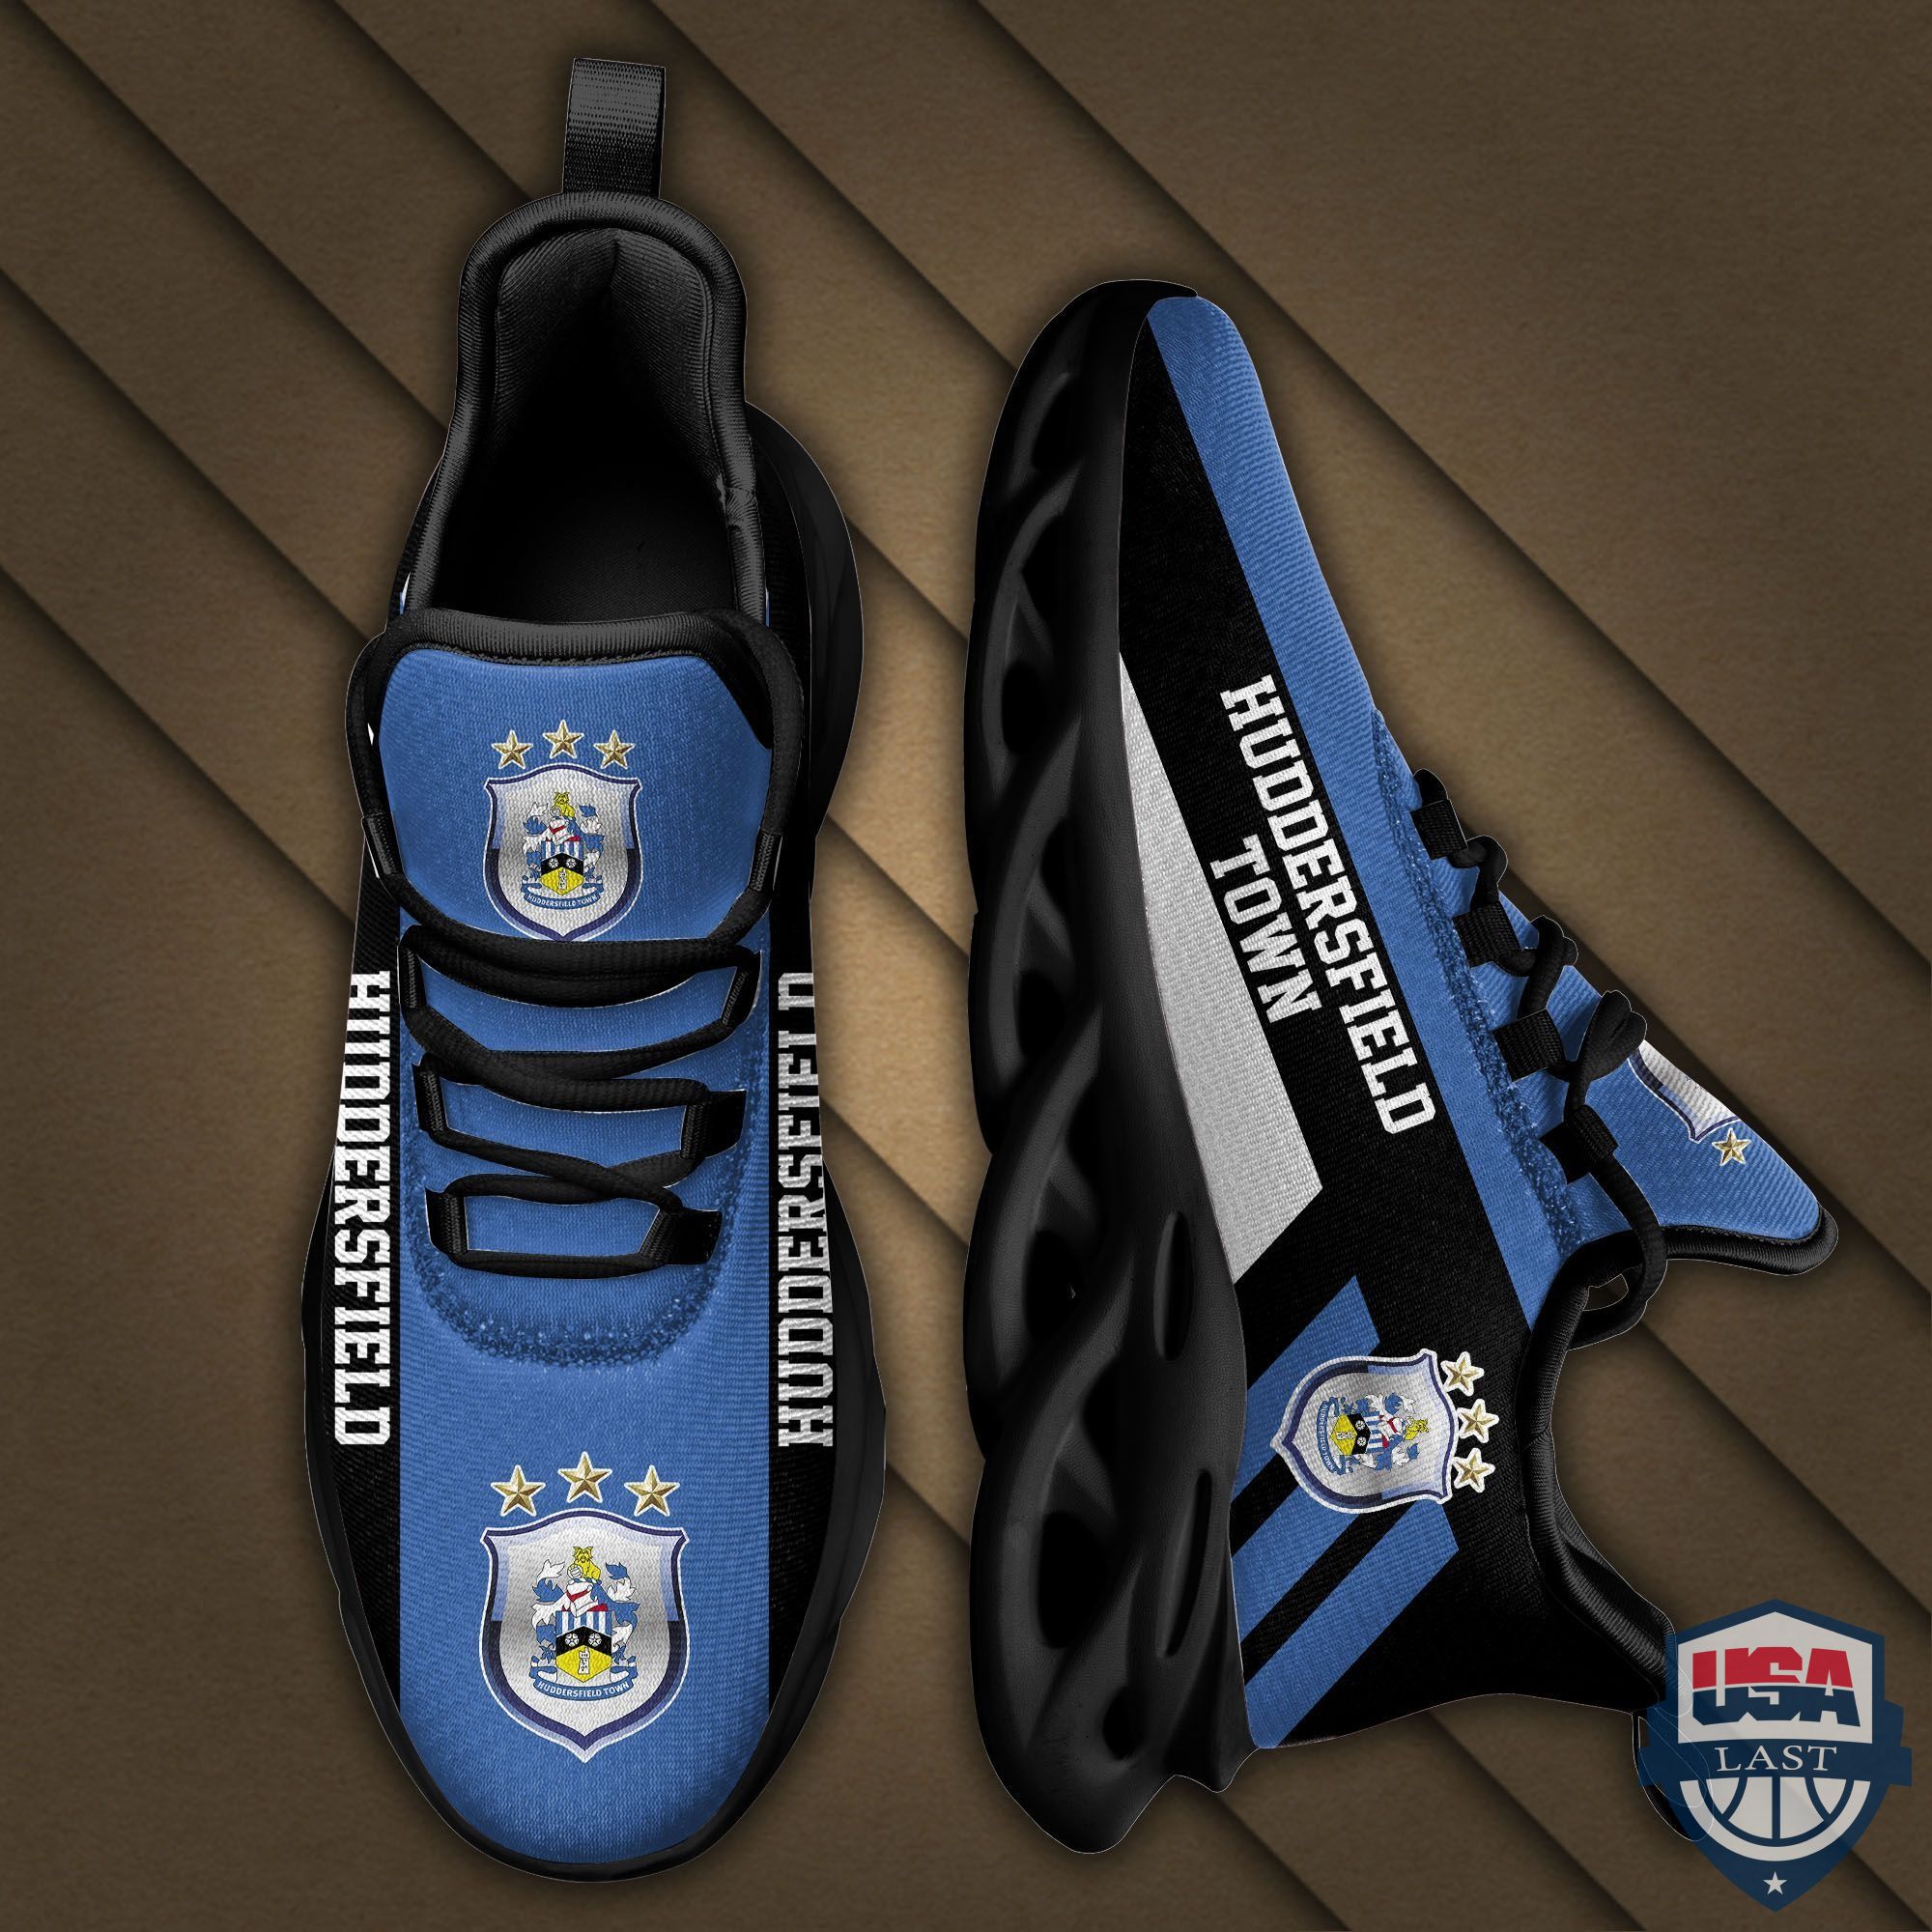 Huddersfield Town AFC Max Soul Sneakers Running Sports Shoes